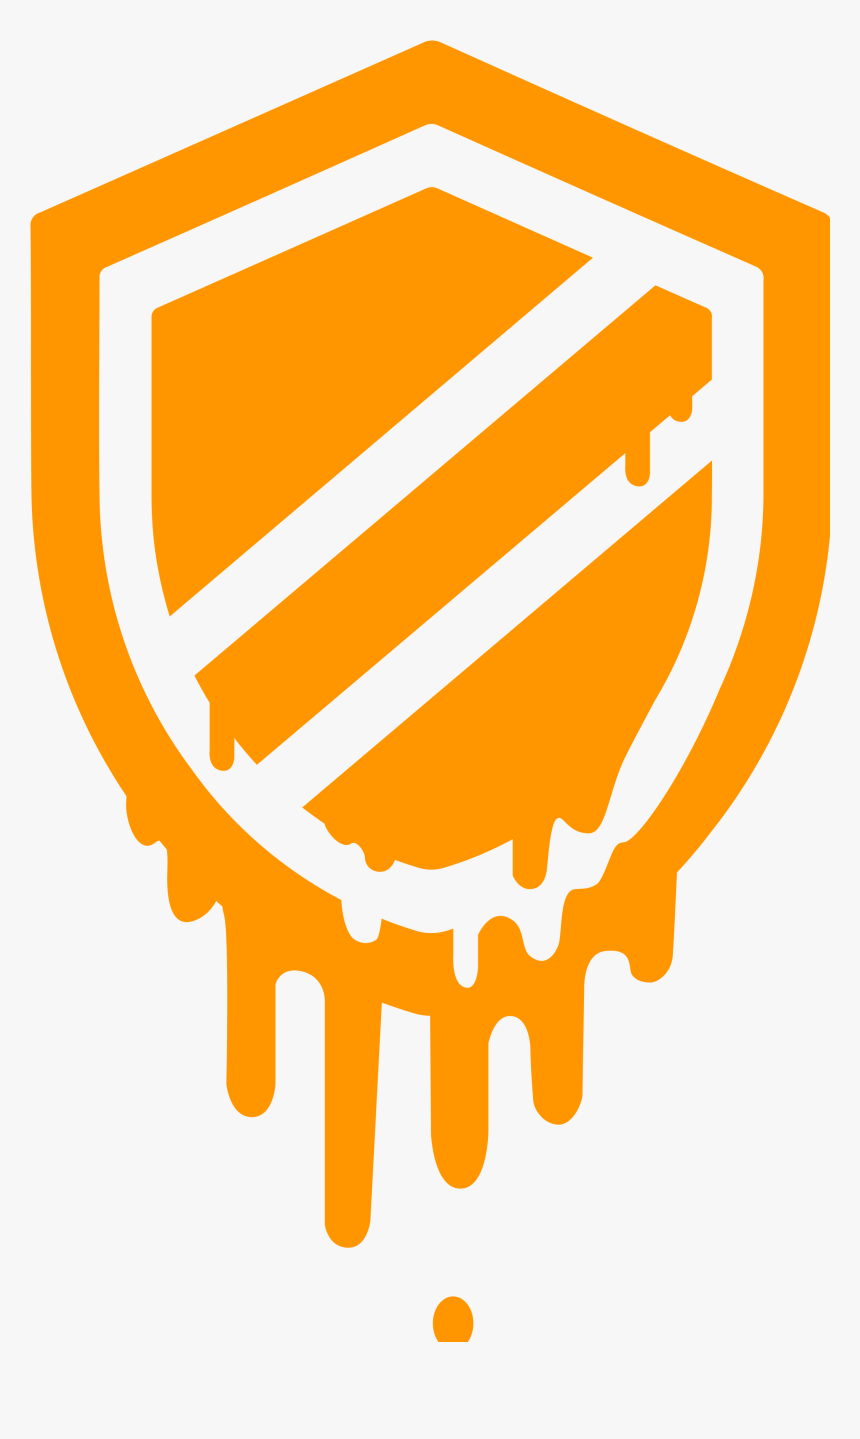 Spectre And Meltdown Png, Transparent Png, Free Download